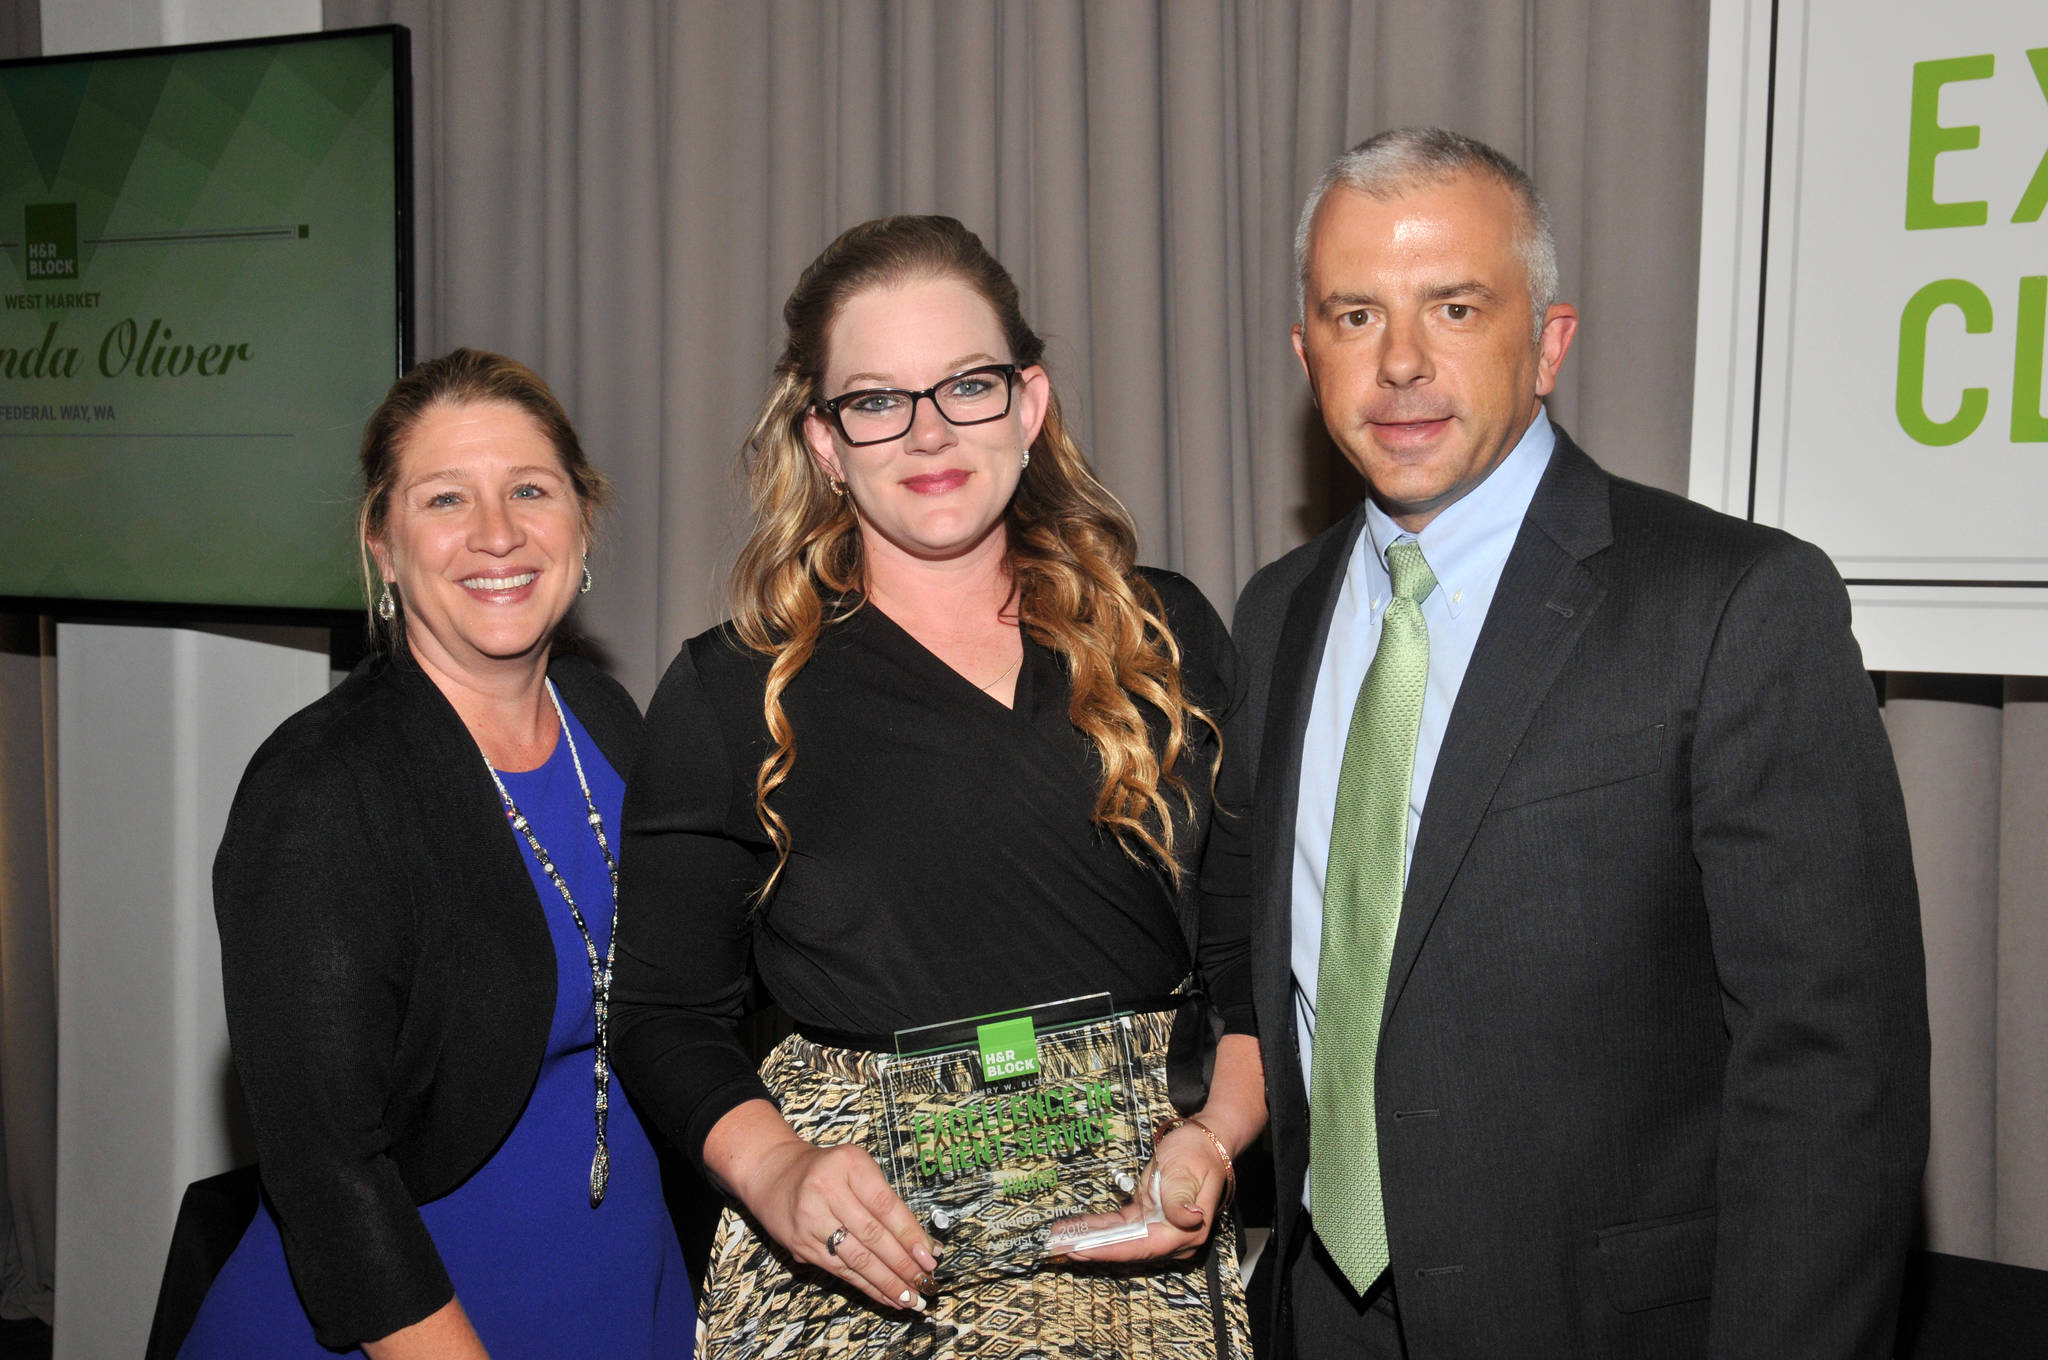 Diane Cooley, H&R Block vice president of retail and sales, left, and Tim Rush, H&R Block vice president of field operations, present Amanda Oilver with the Henry W. Bloch Excellence in Client Service award. COURTESY PHOTO